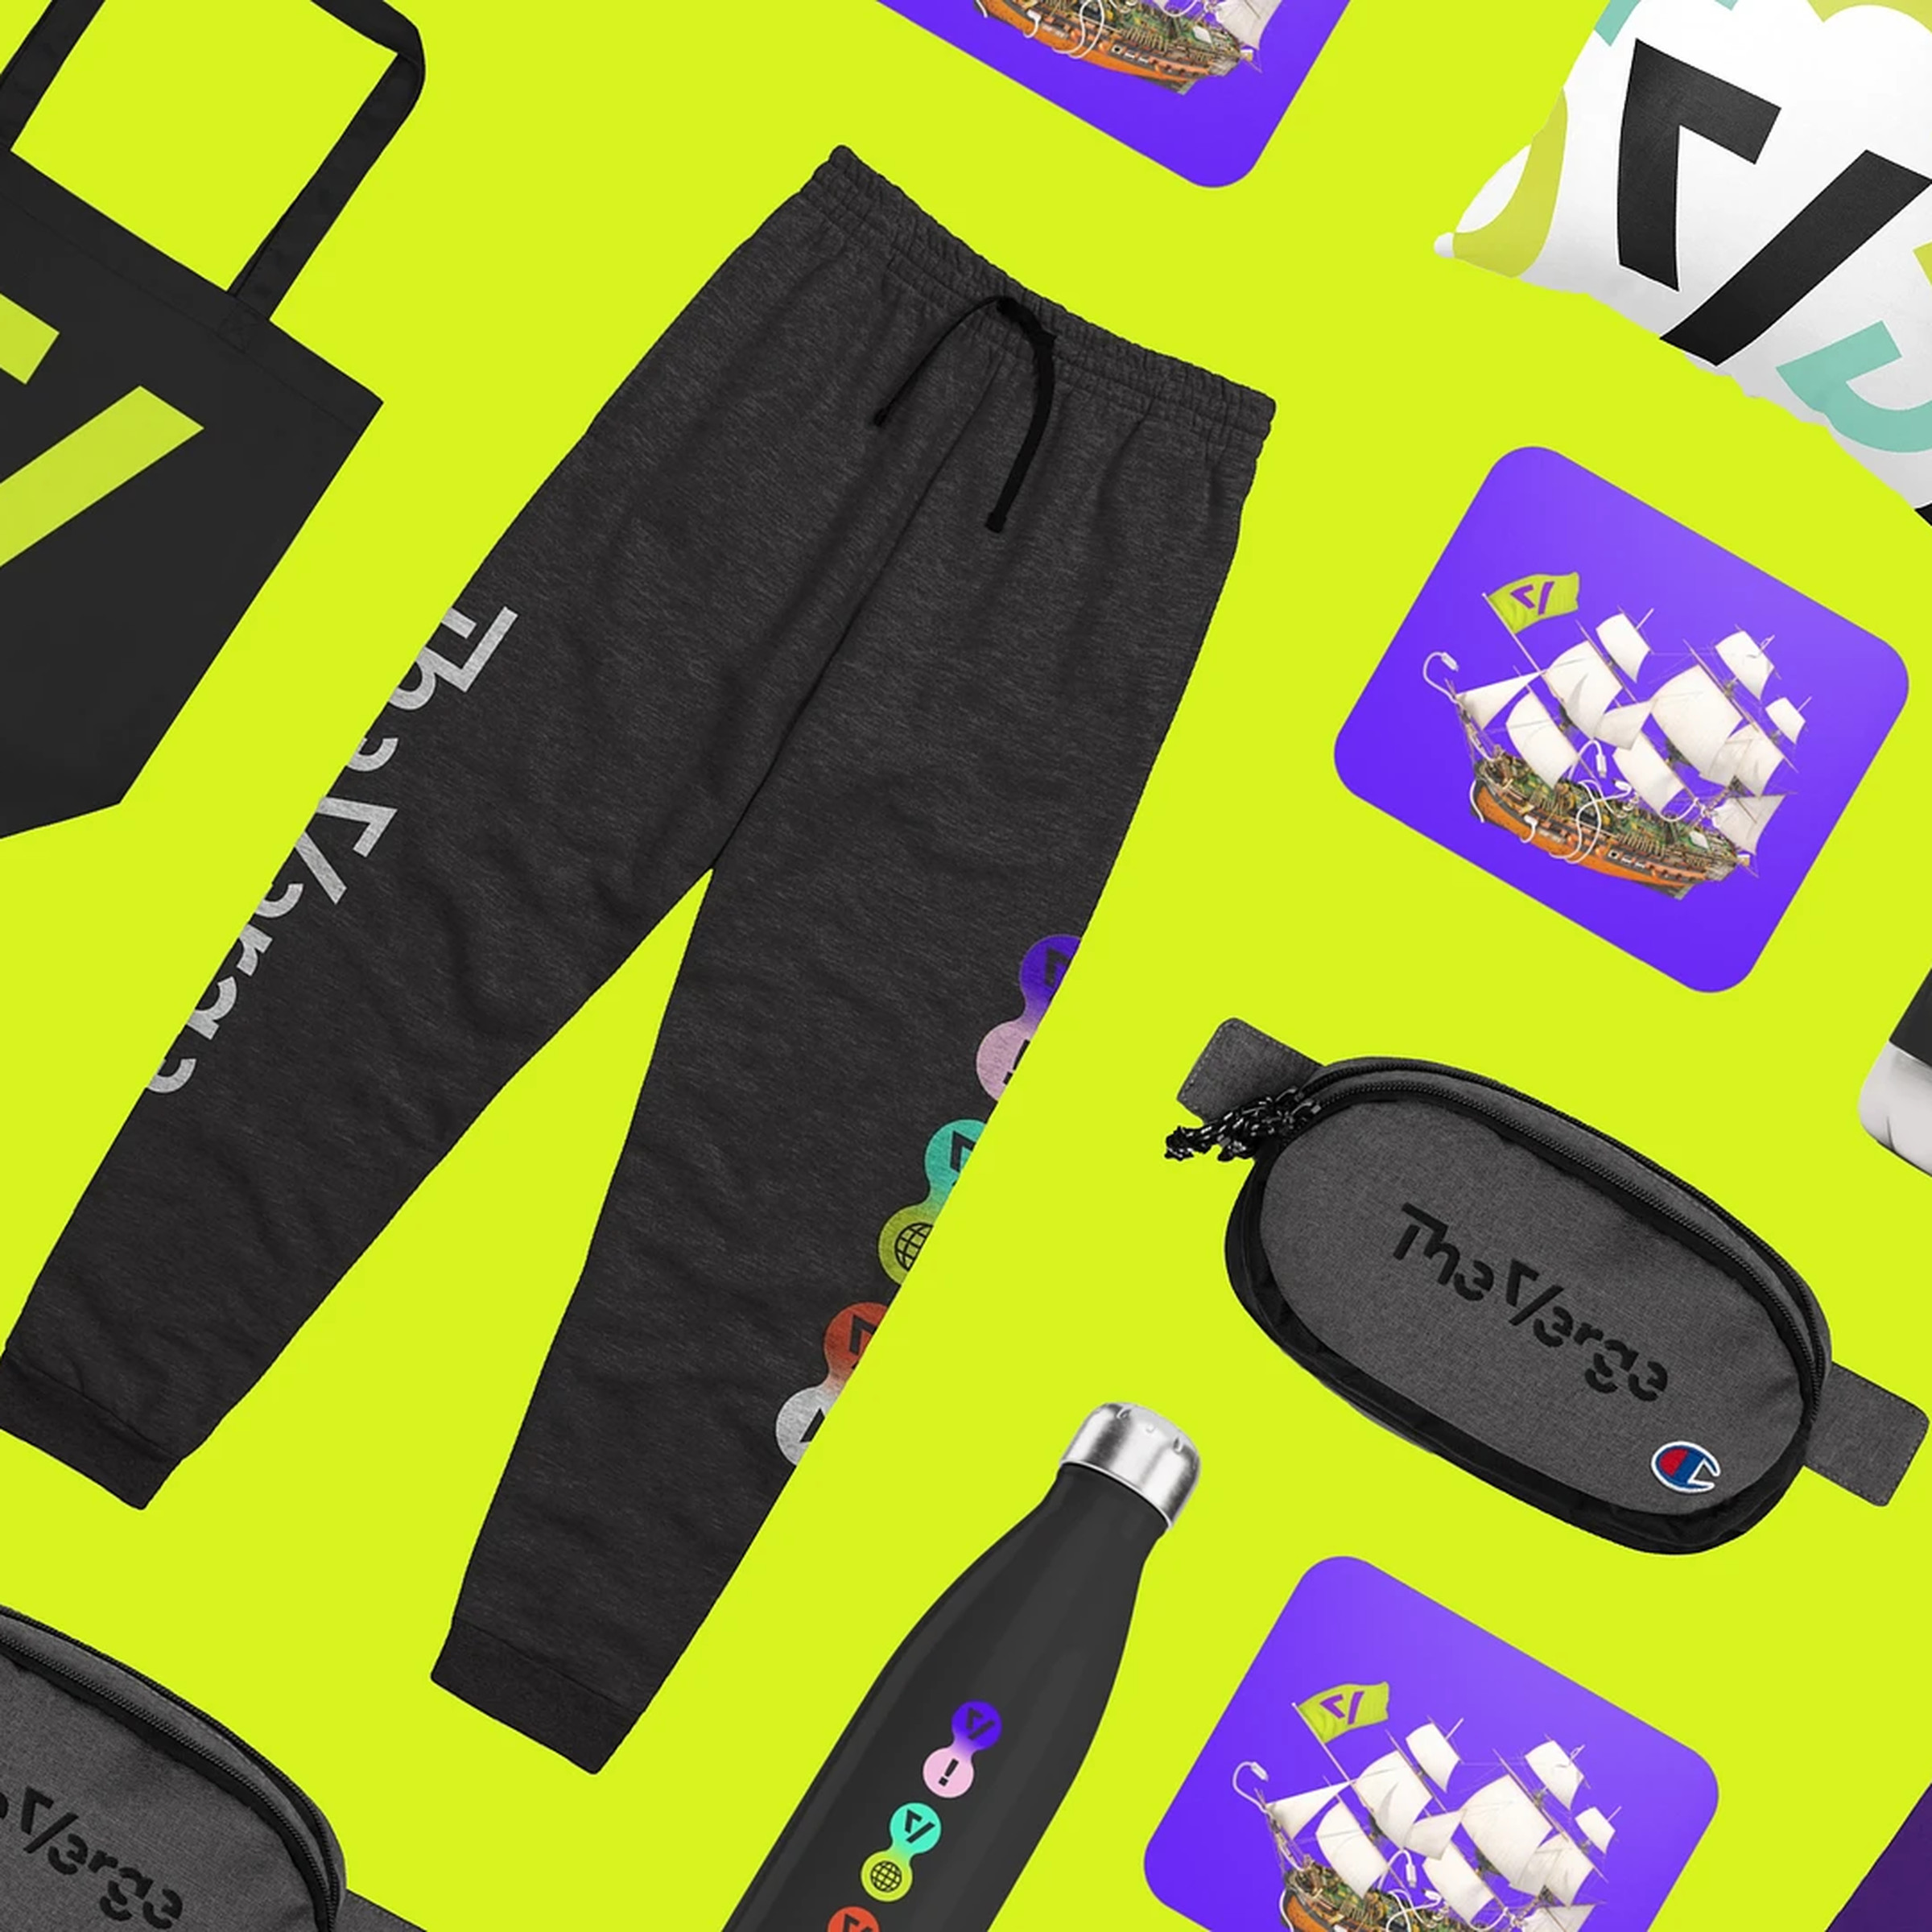 Merch from The Verge